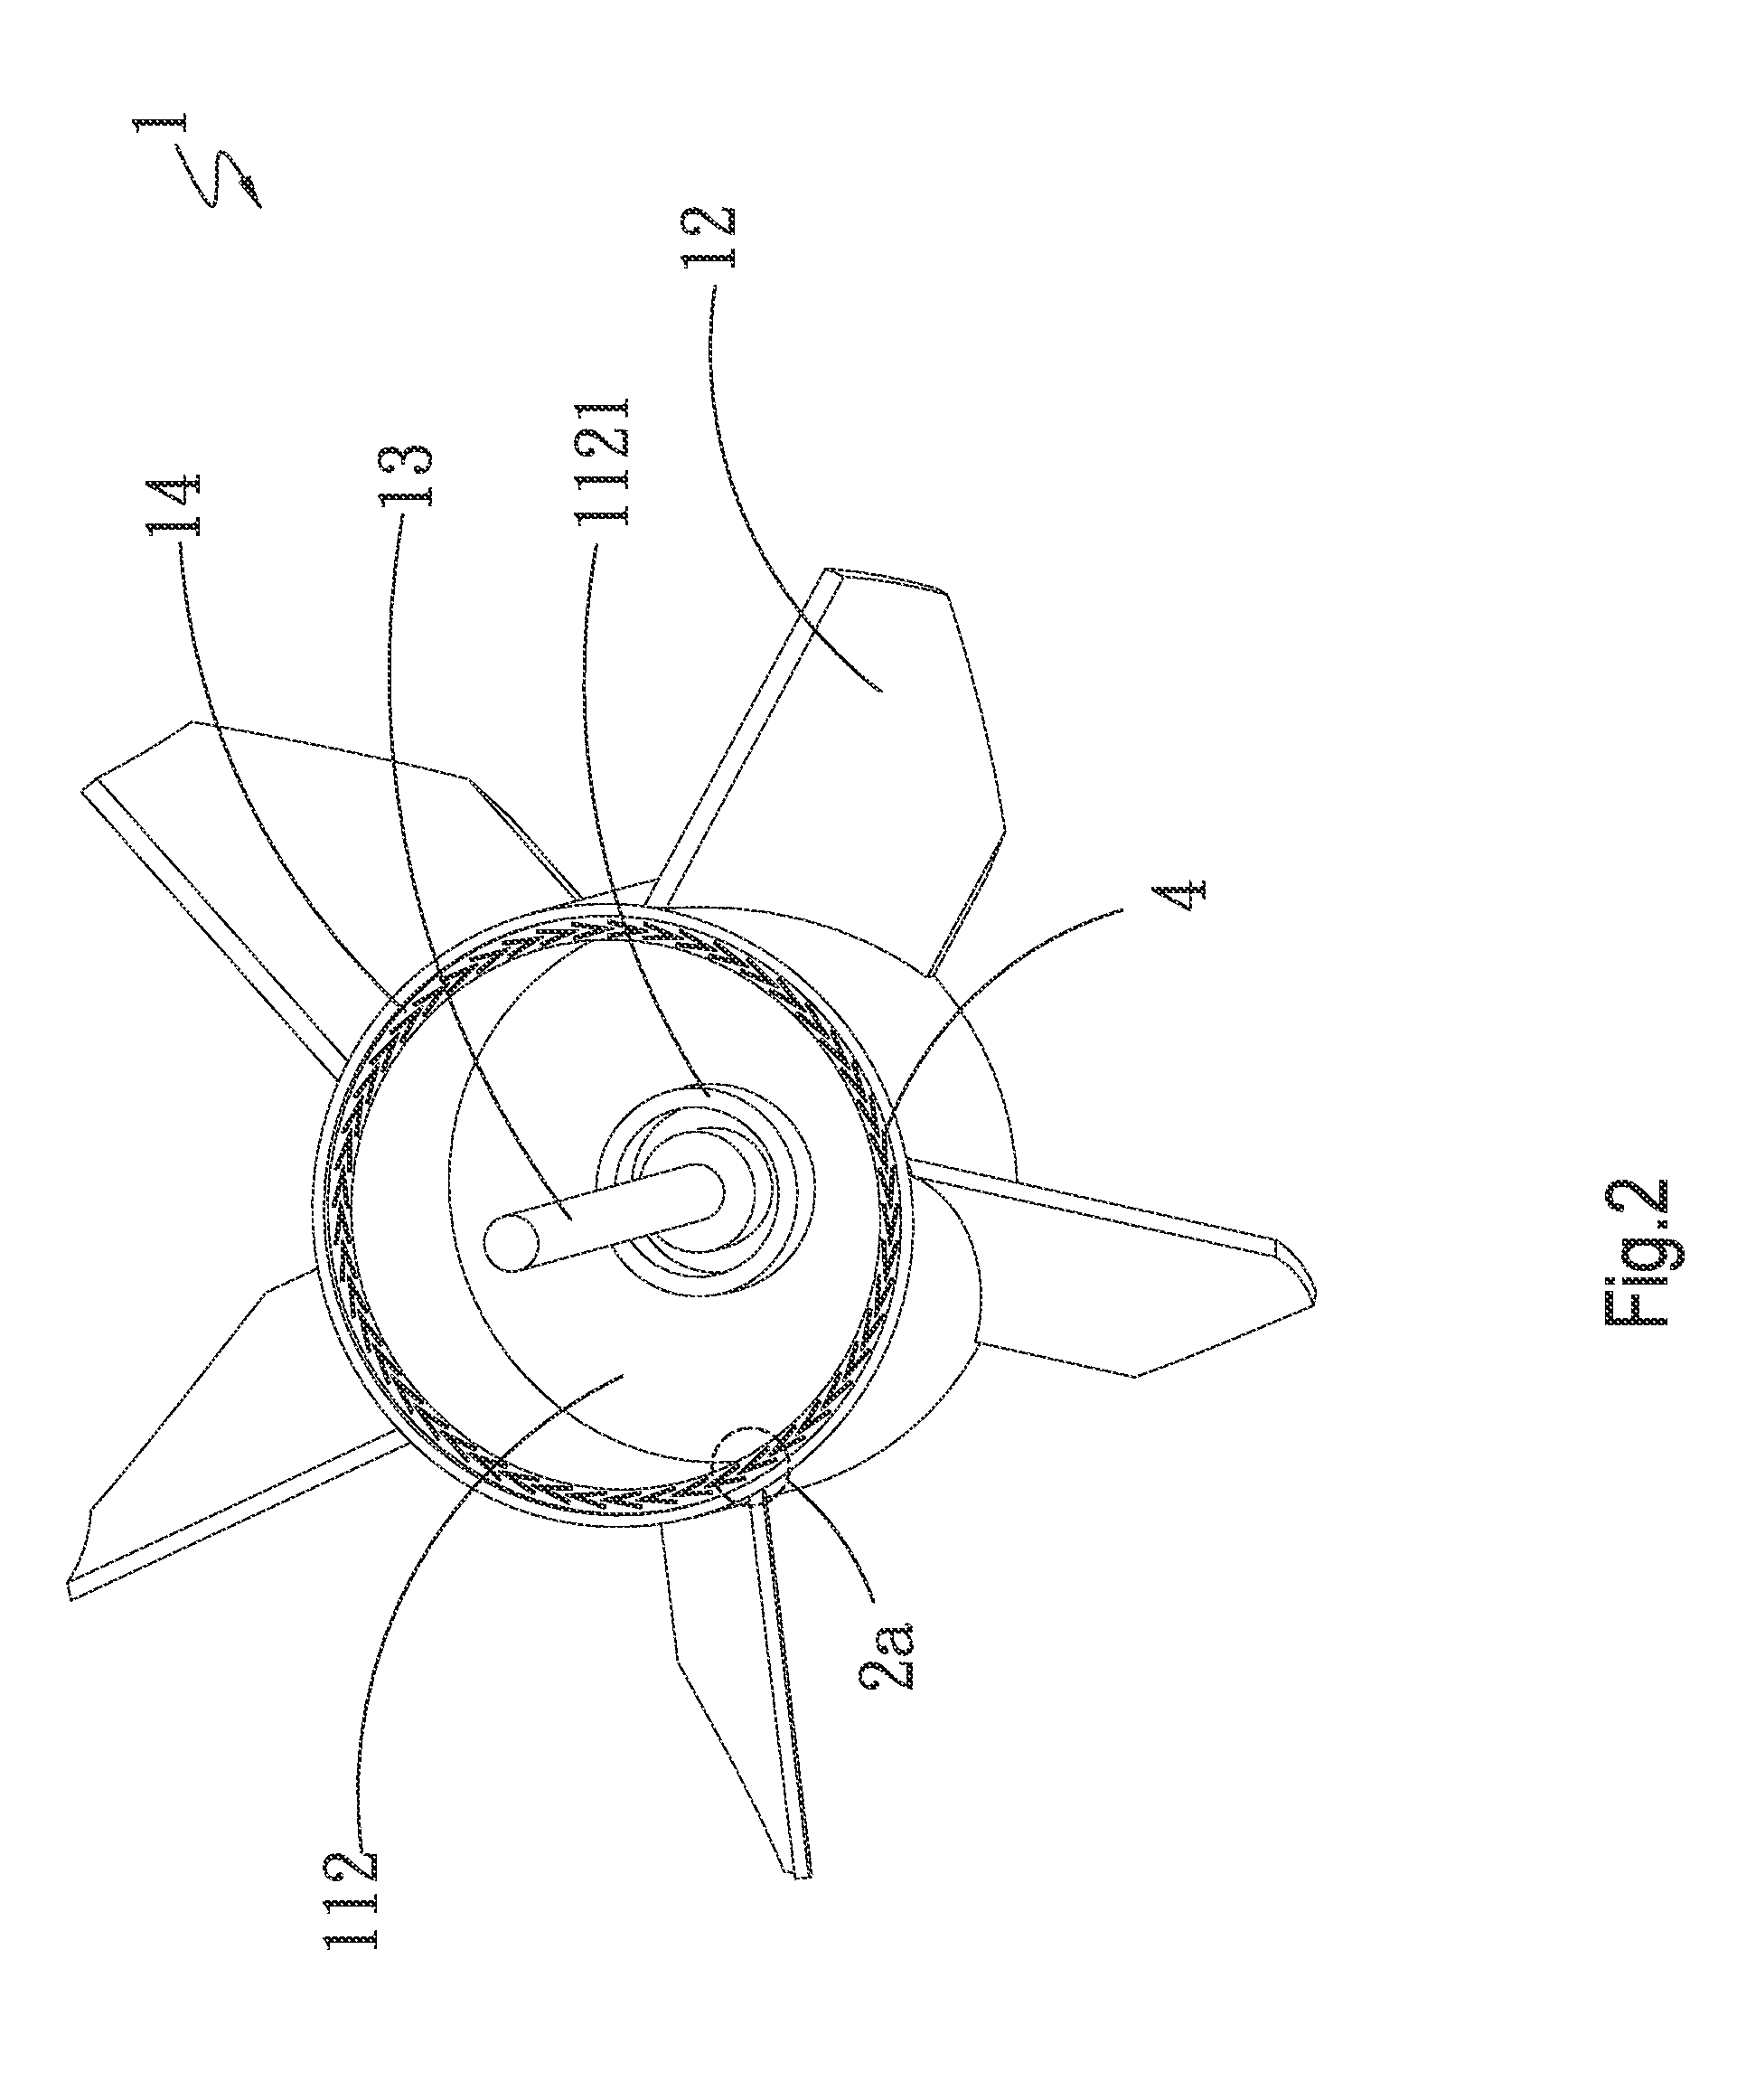 Fan with pressurizing structure